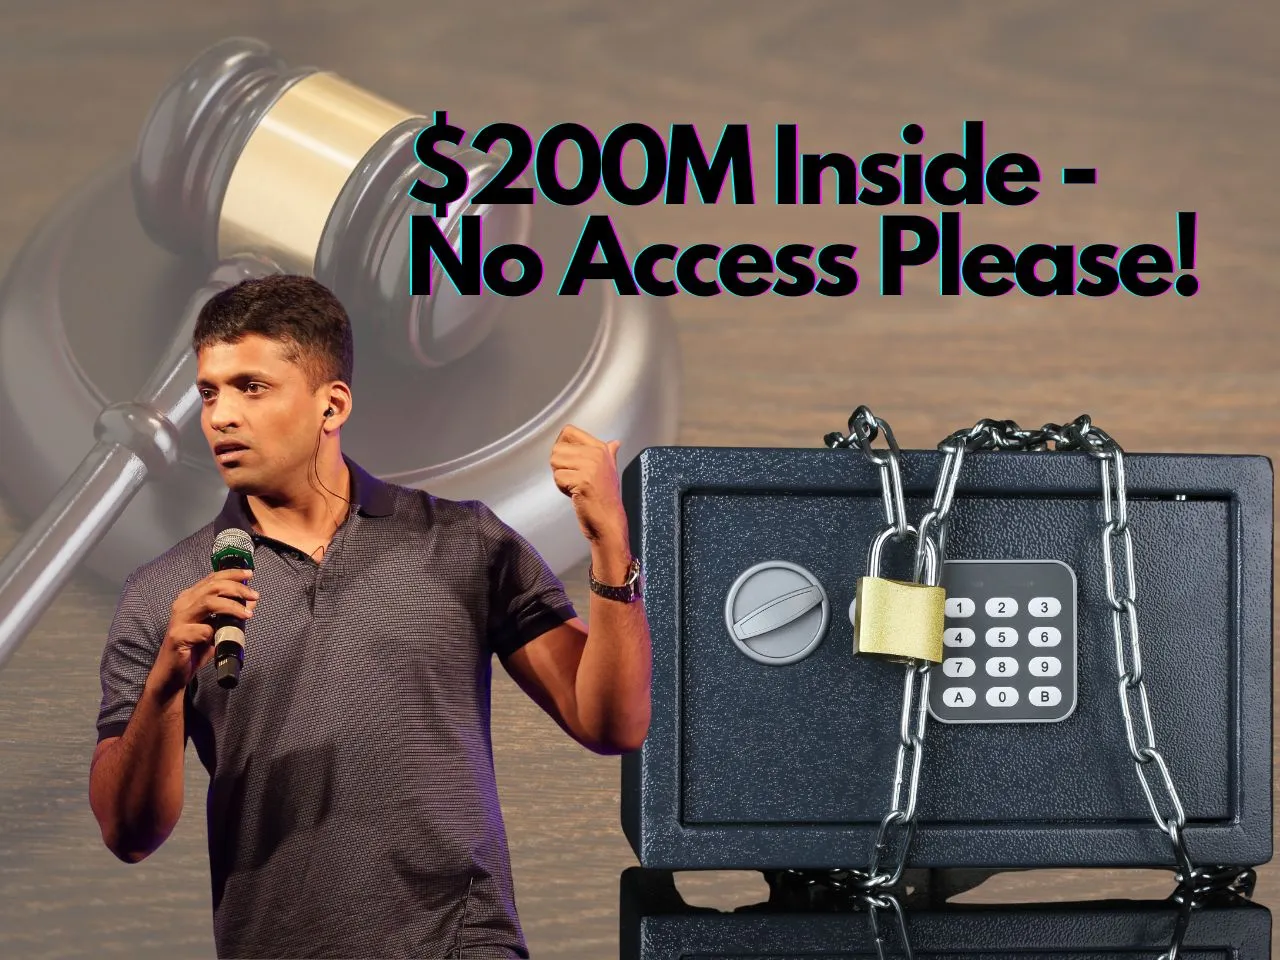 Byju's: Quest for $200 Million - Close, Yet Elusive